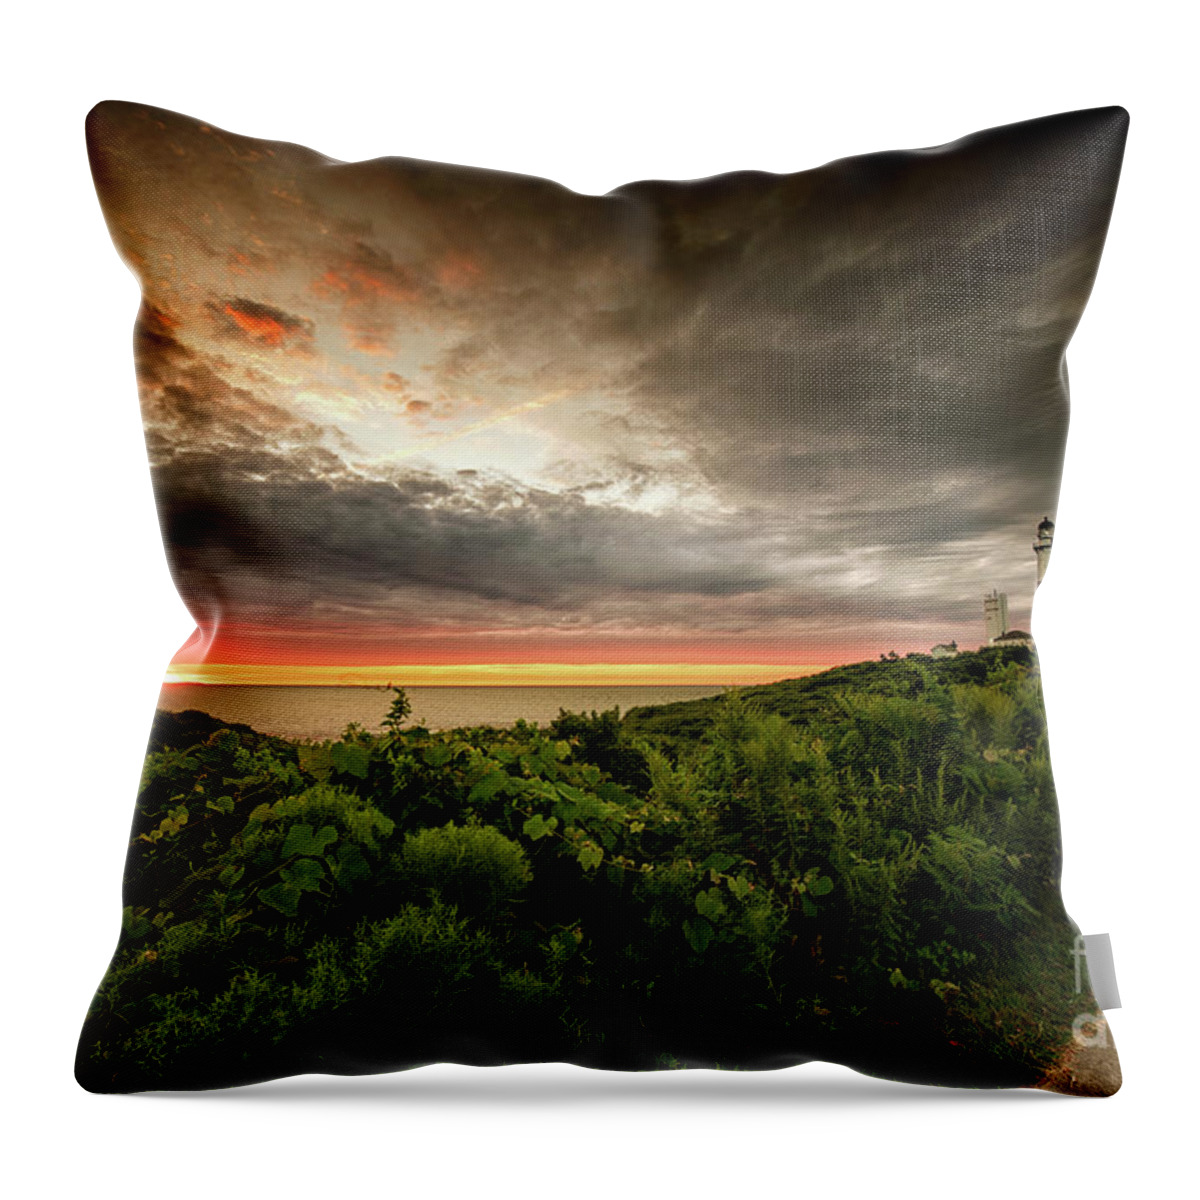 Stary Throw Pillow featuring the photograph Montauk Sunrise by Alissa Beth Photography